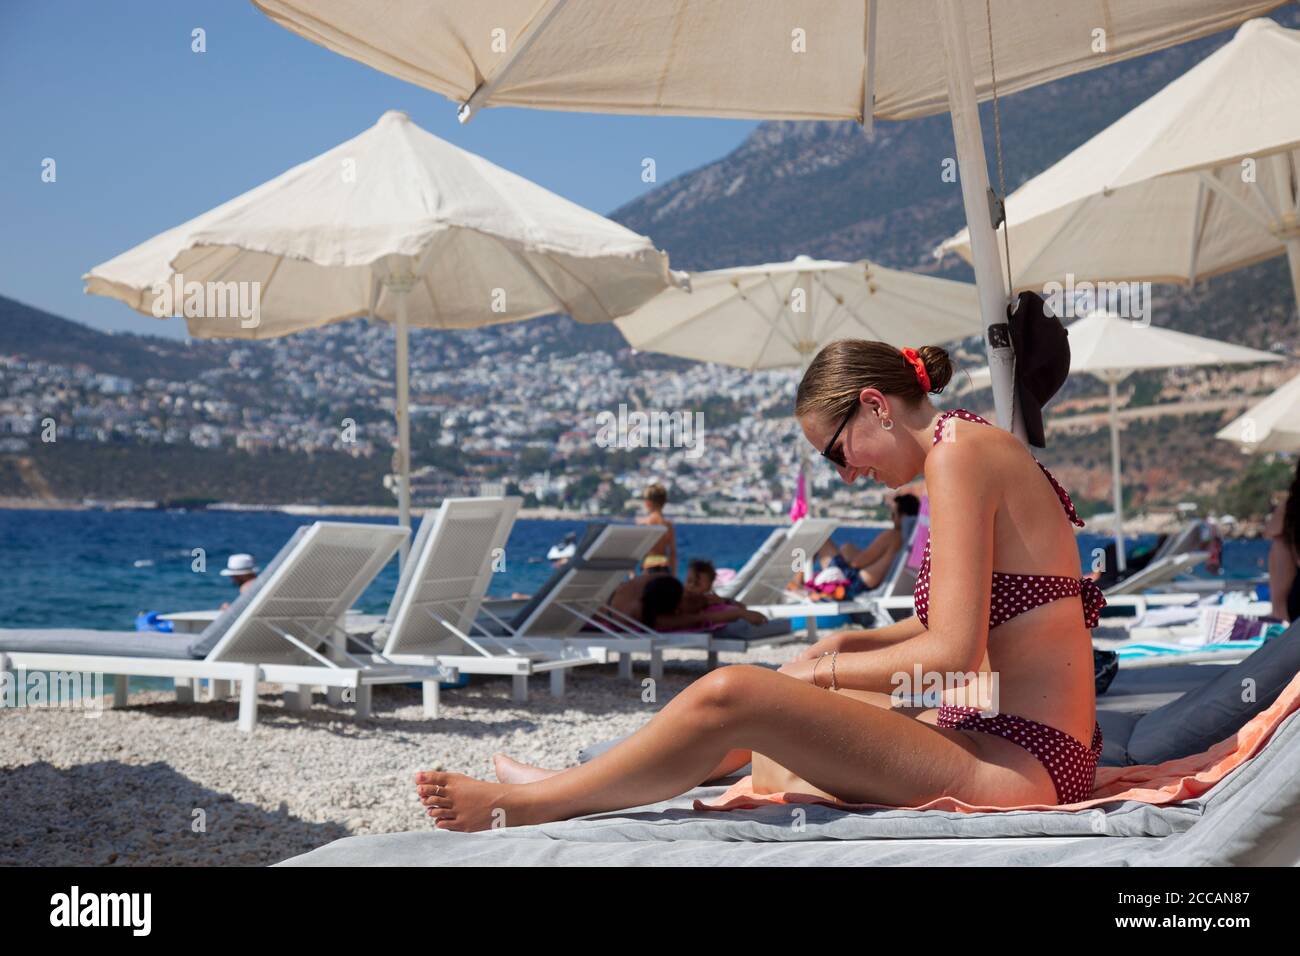 A young woman  ( model released ) sitting on sunlounger at the Kalkan beach club,  Kishla, with the town of Kalkan, Turkey, in the background. Kalkan Stock Photo